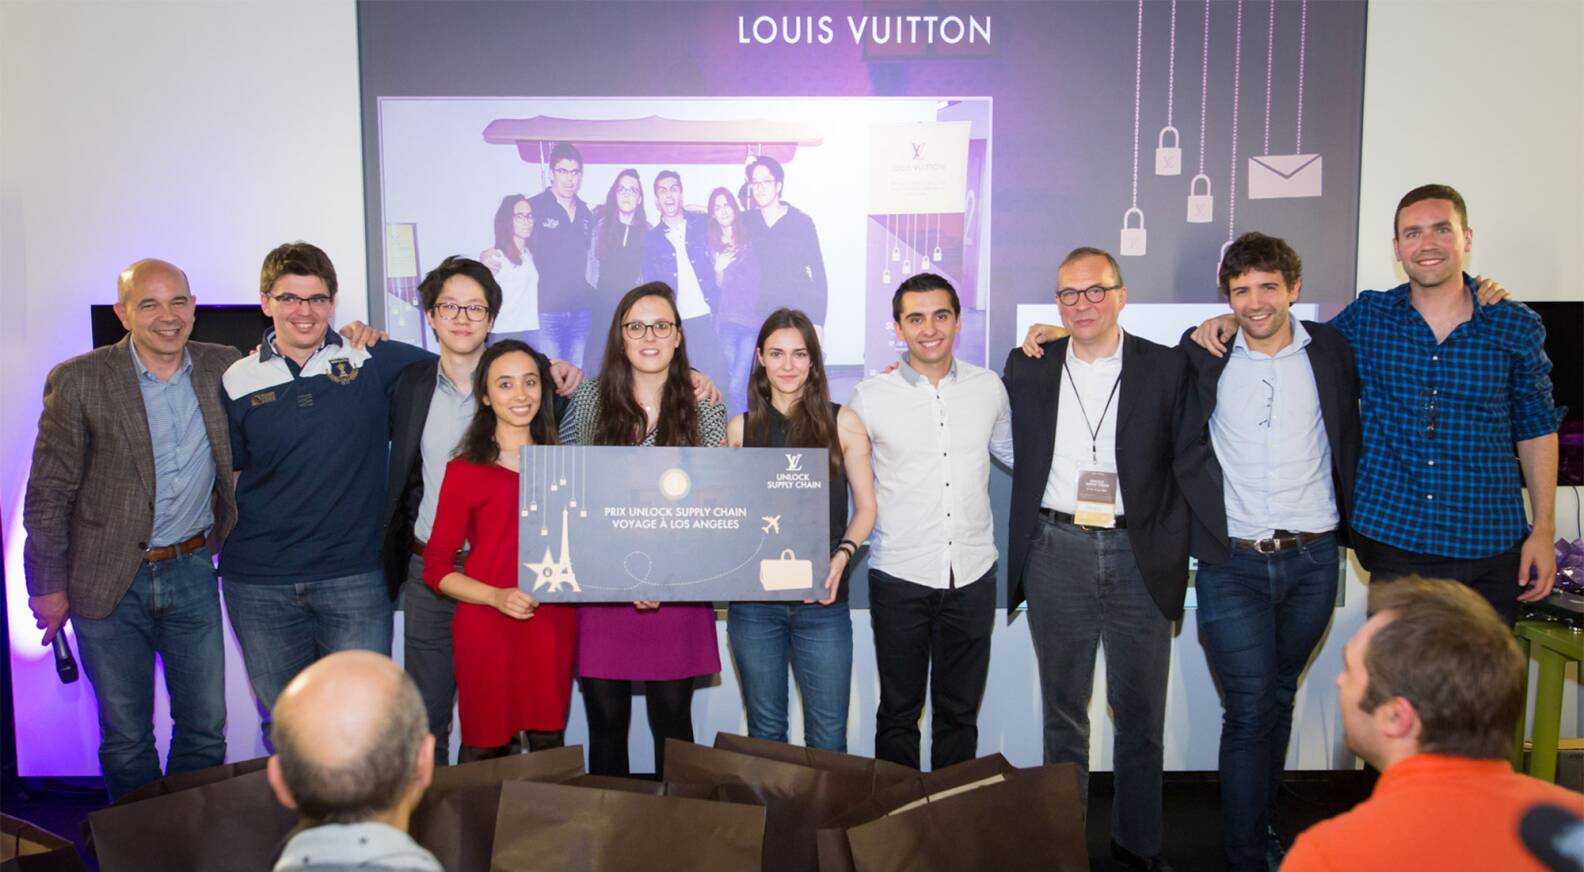 Louis Vuitton Hackathon to build a connected supply chain - LVMH